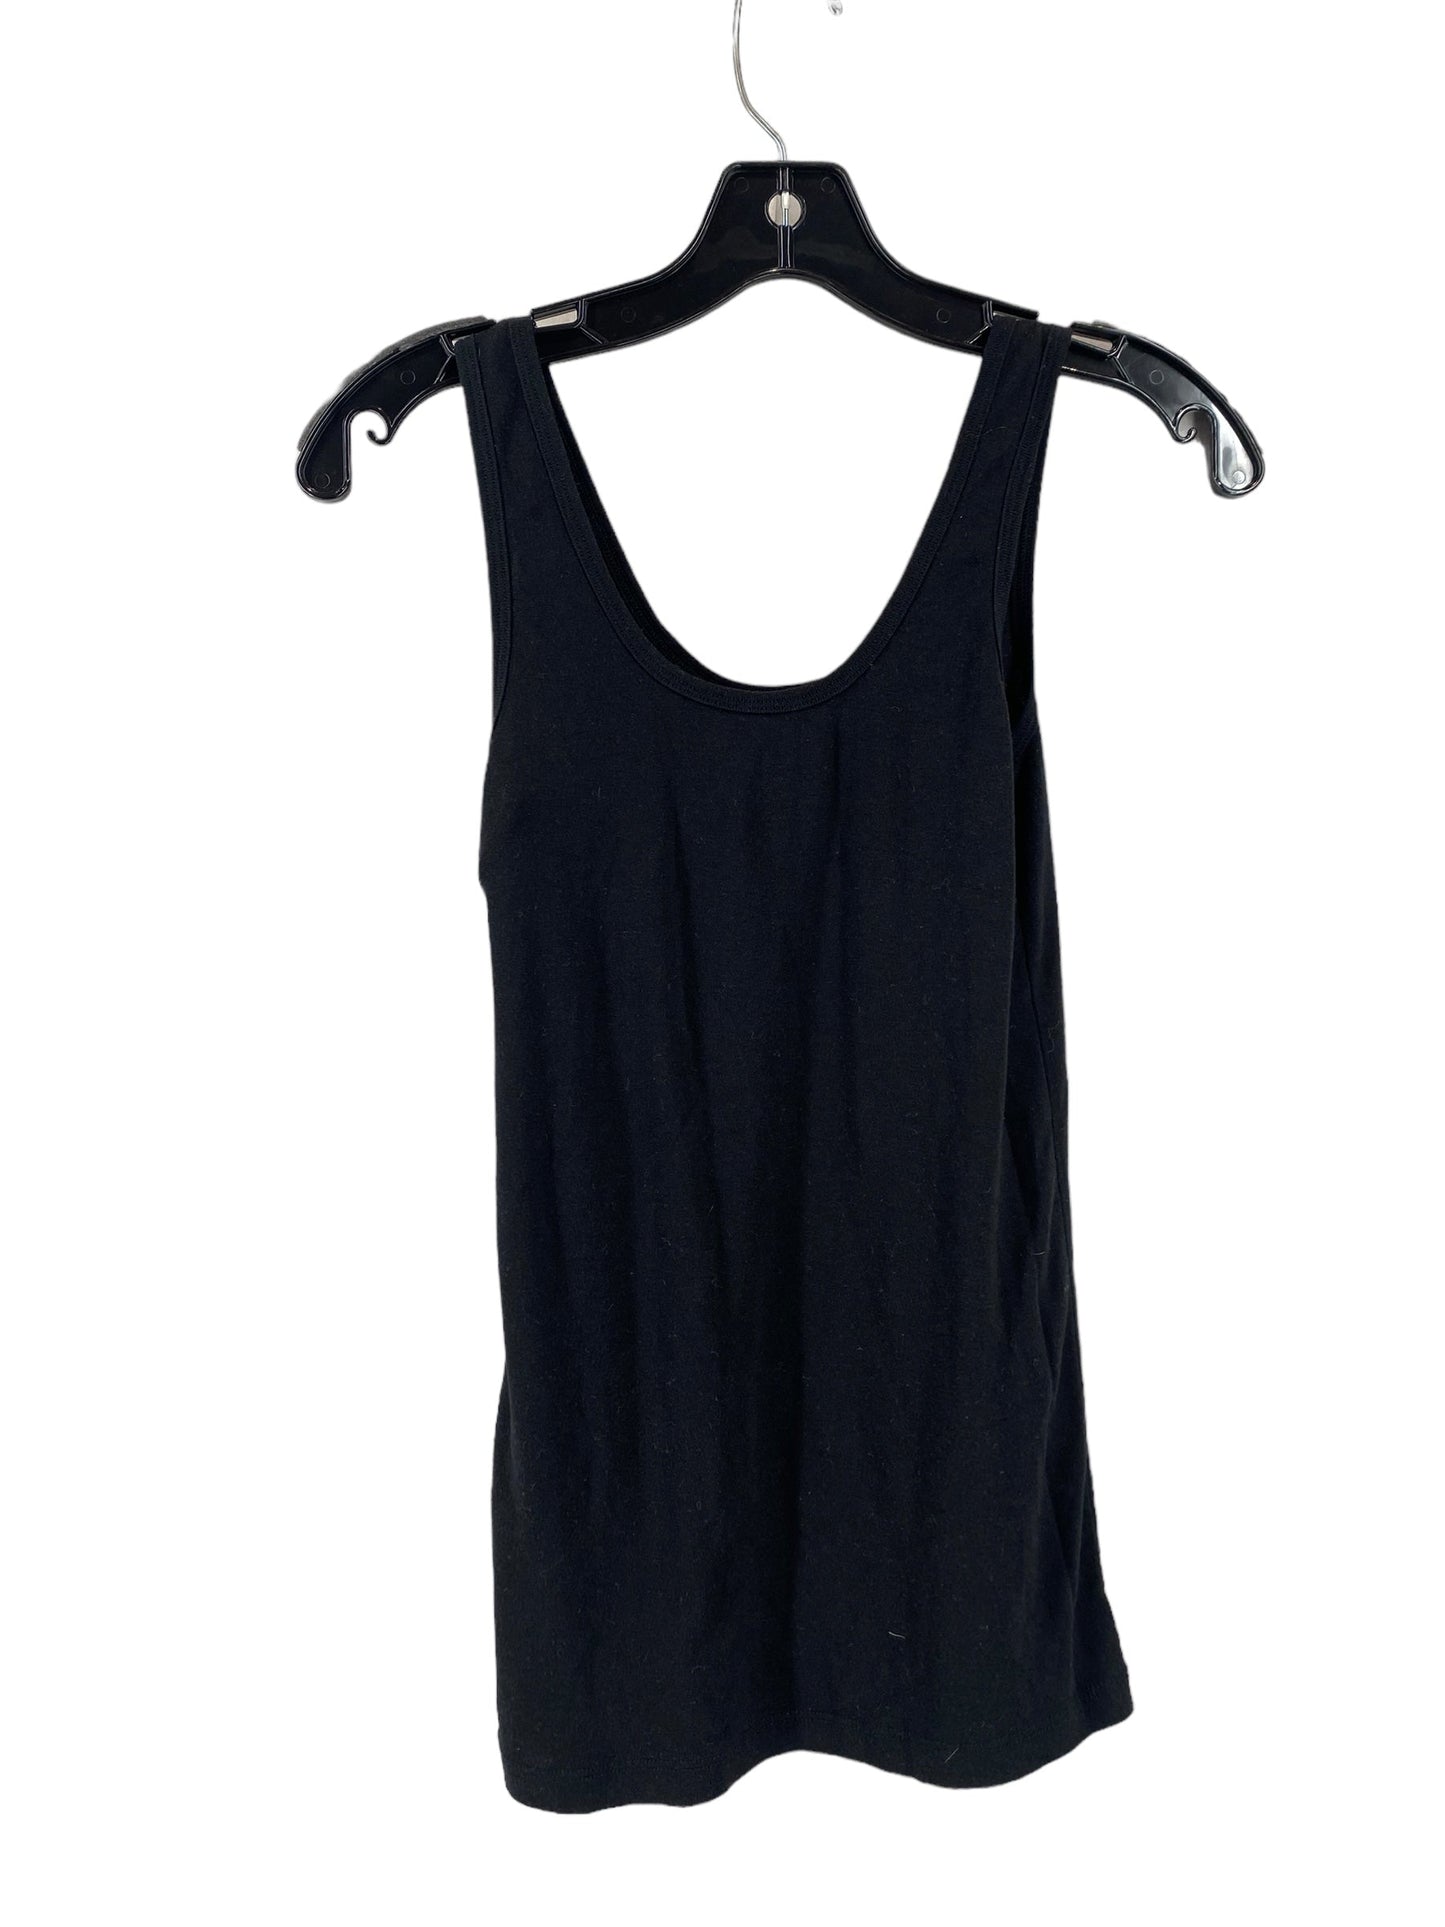 Tank Top By Mossimo  Size: M